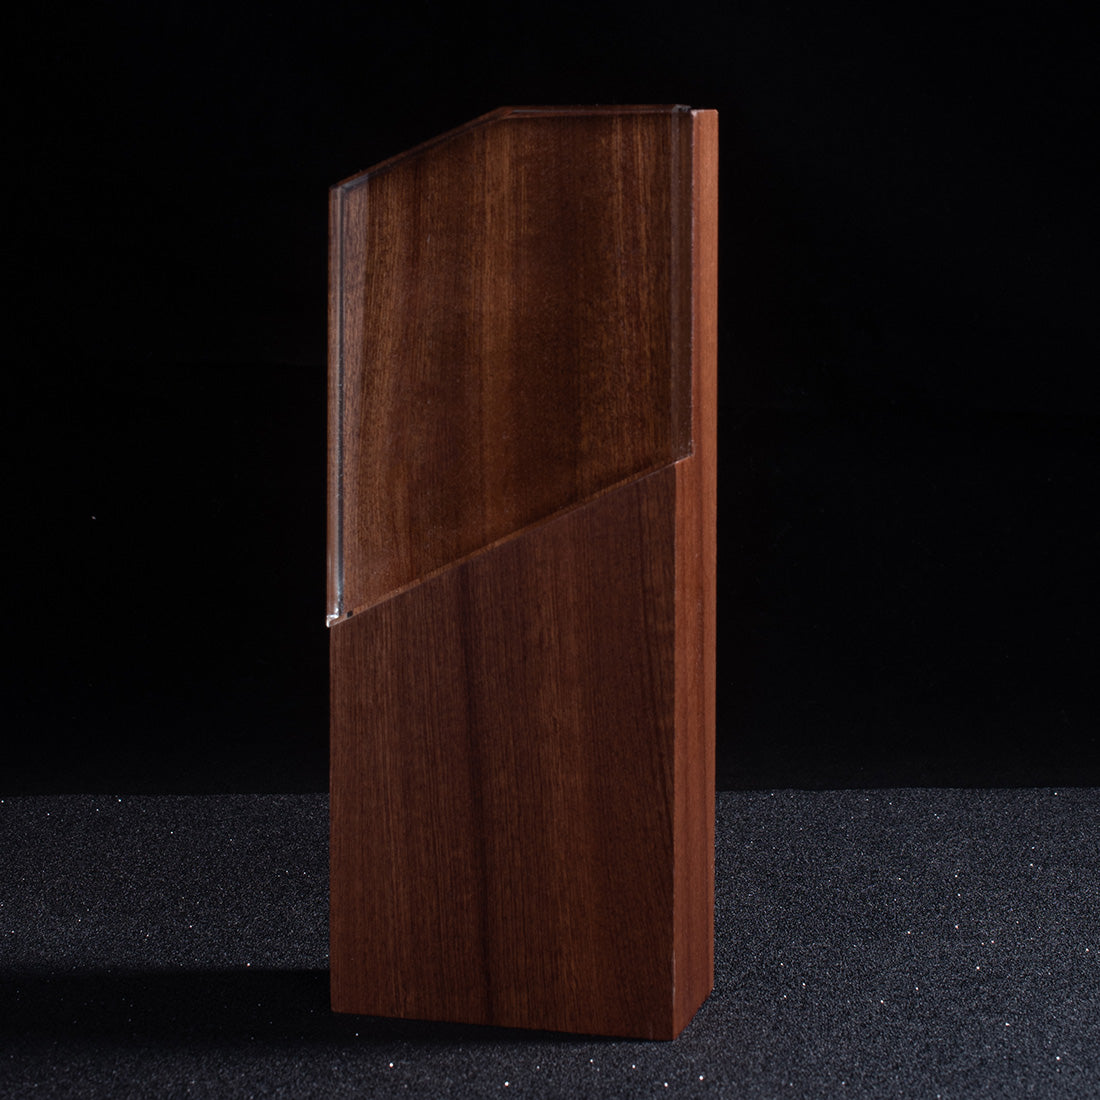 Longwin Nut-brown Wooden Trophy with Beveled Edge